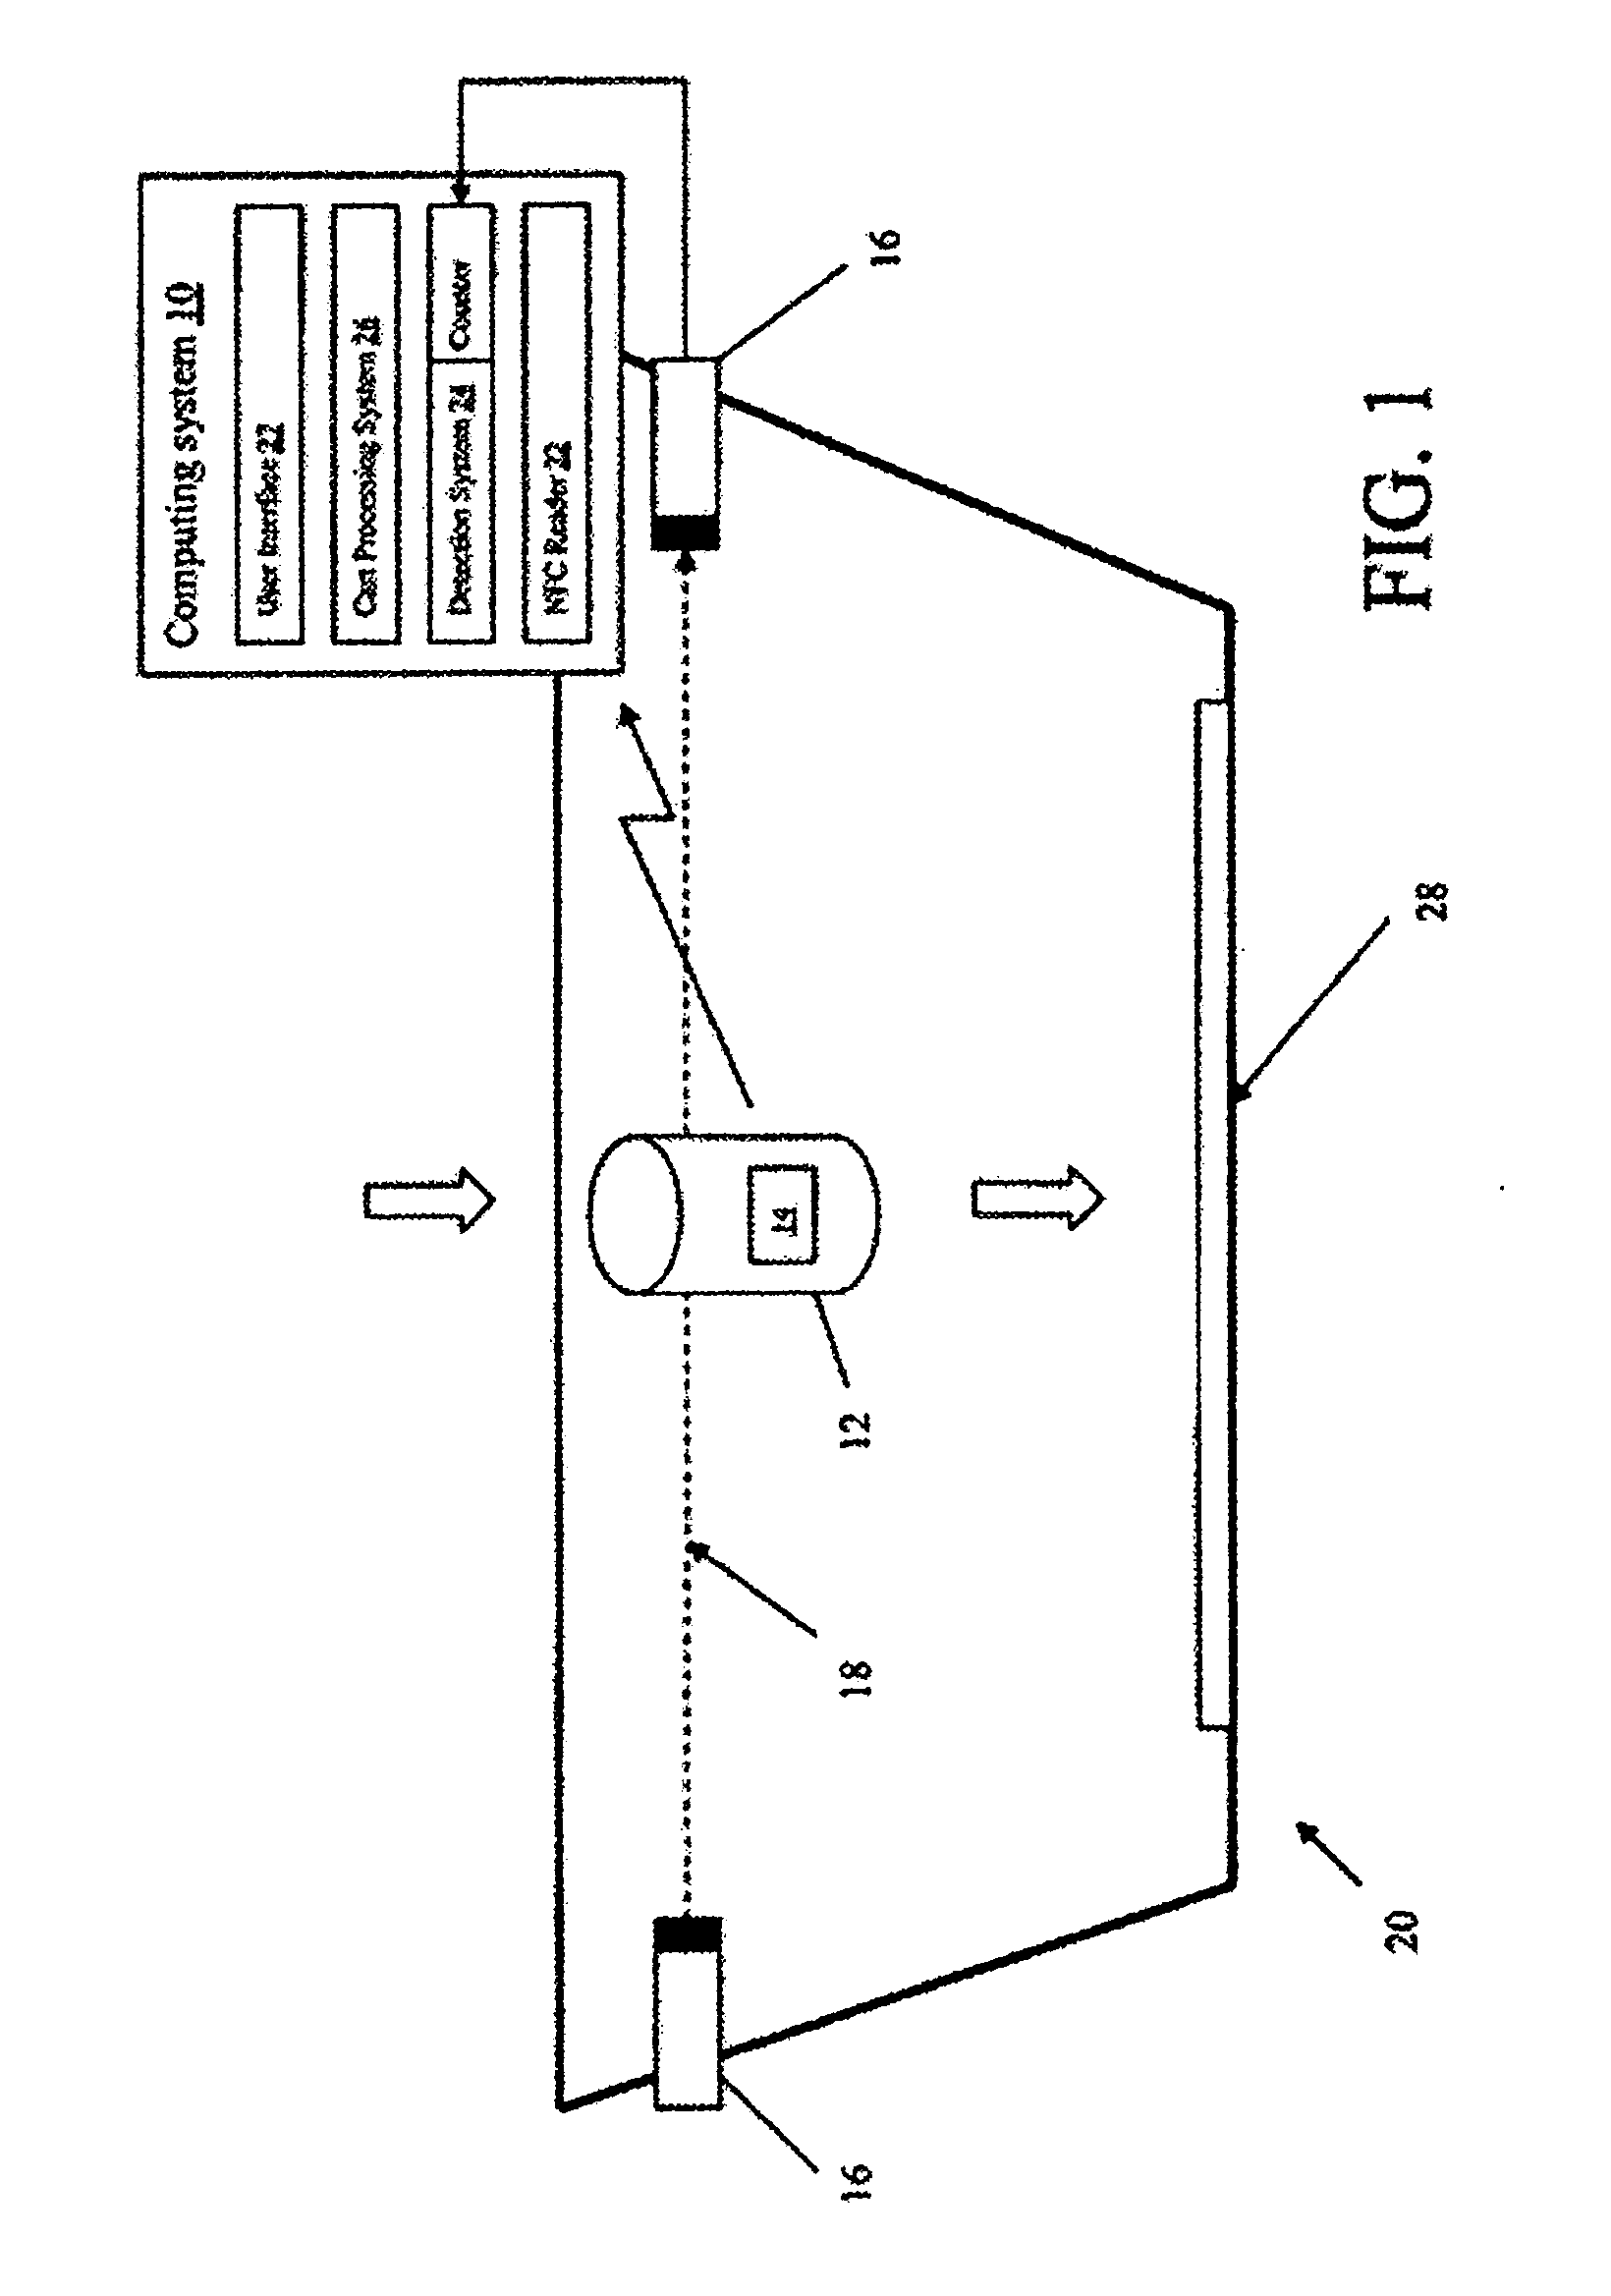 System and method for processing items placed in a container